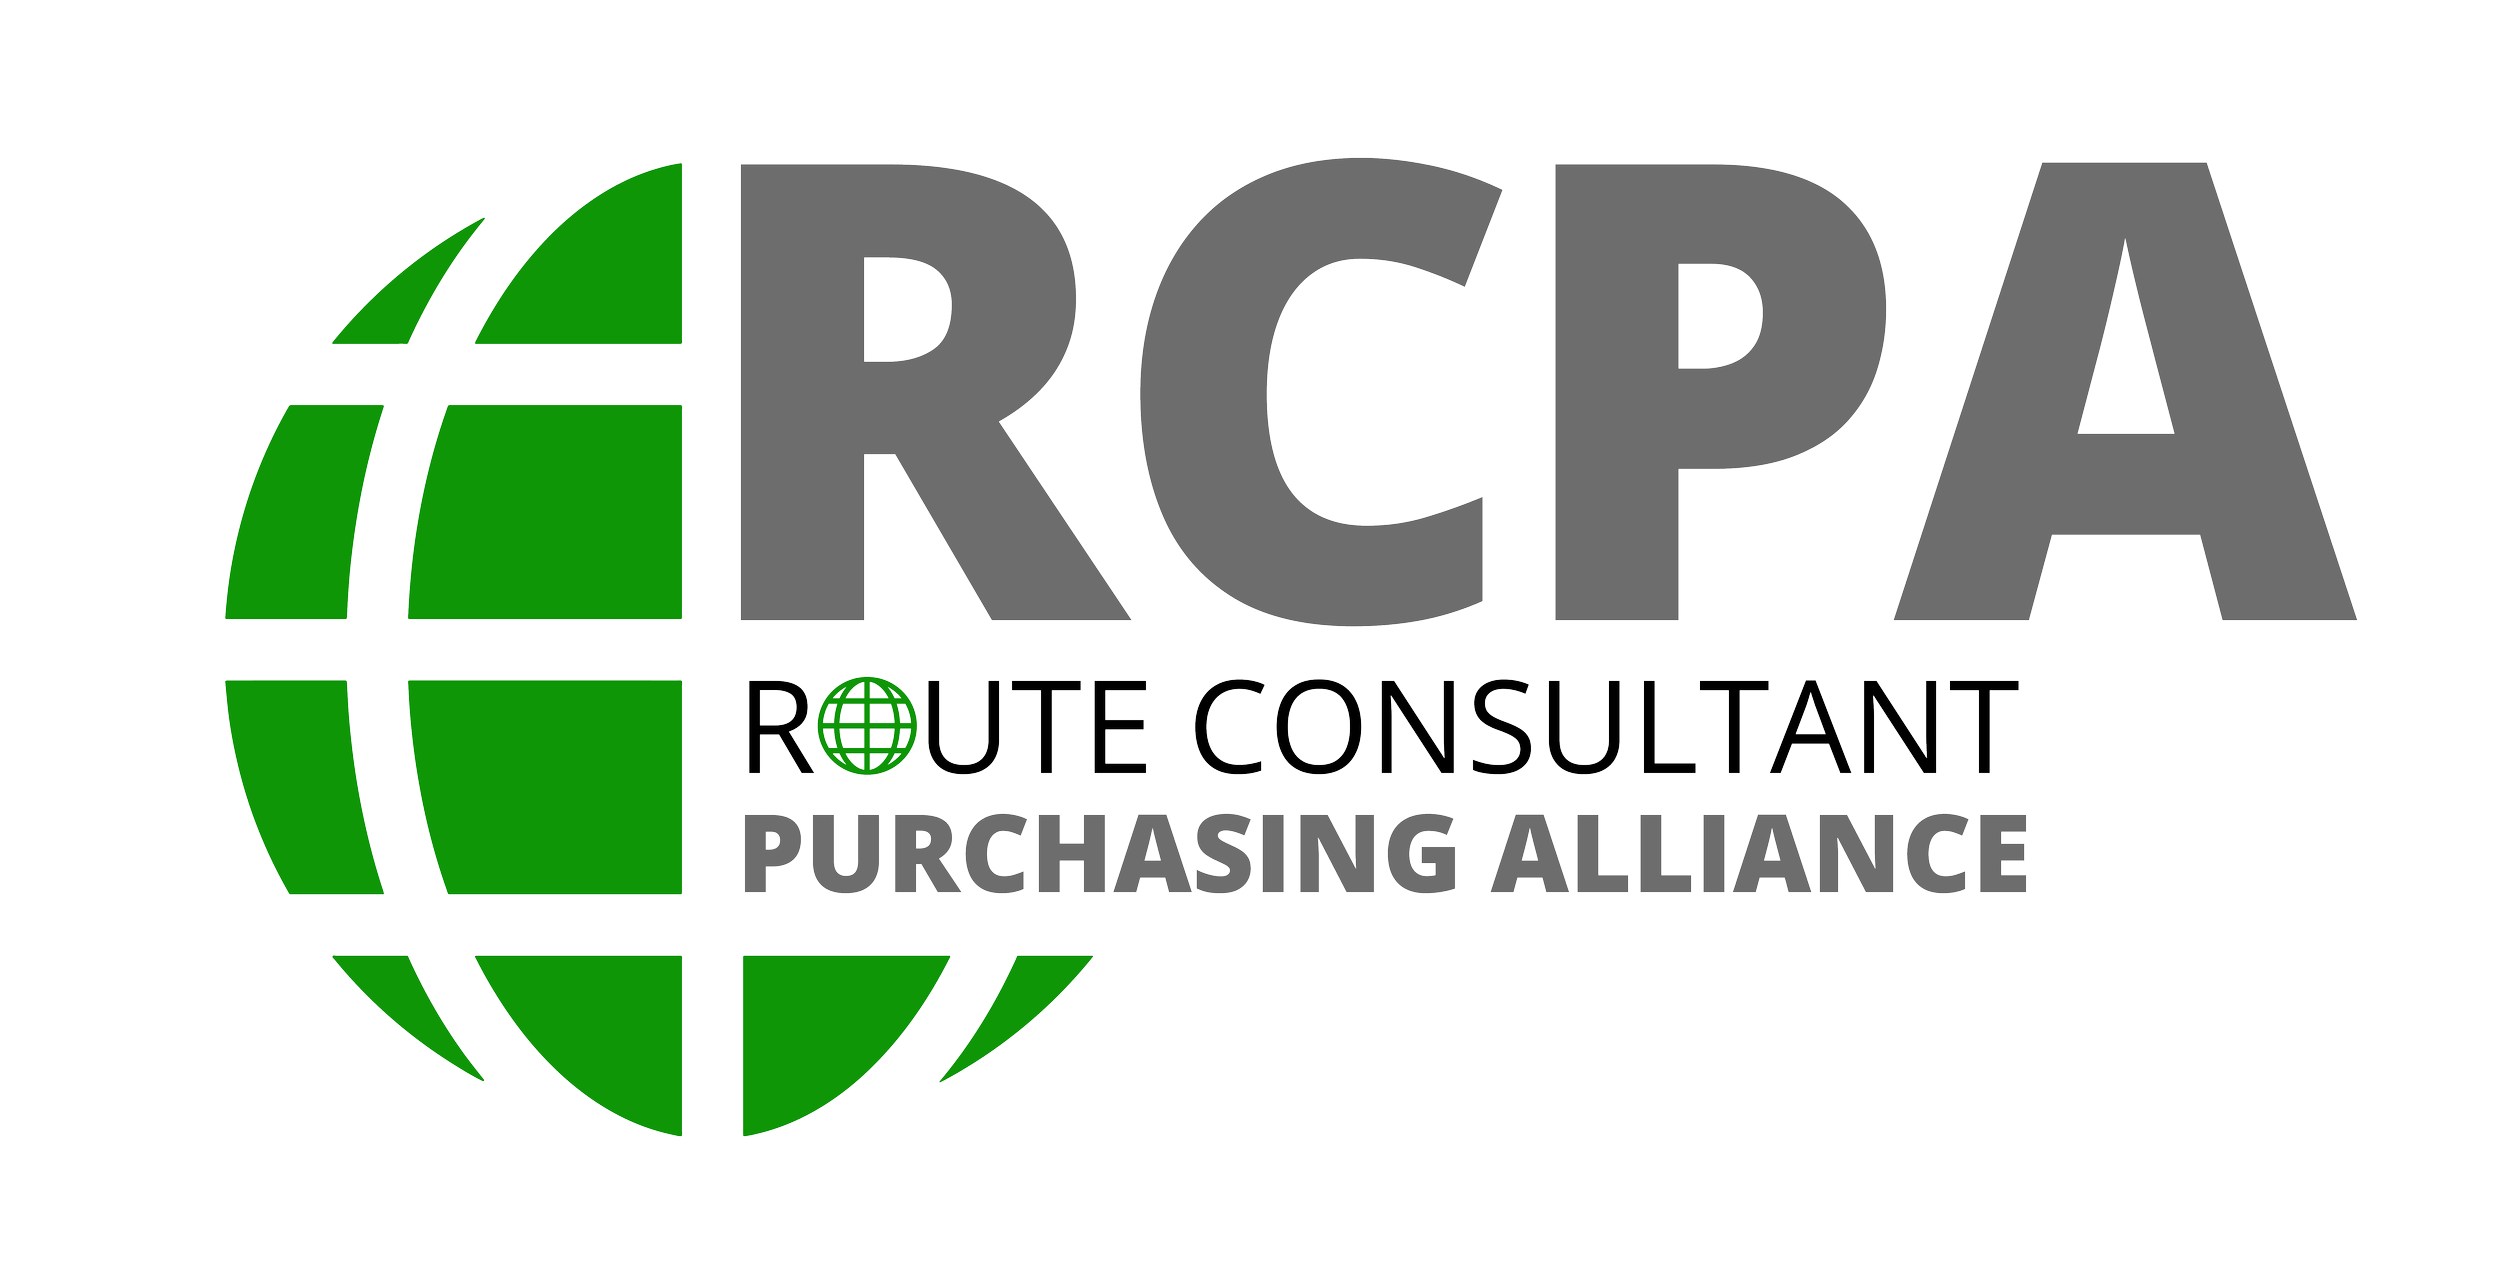 Route Consultant Purchasing Alliance